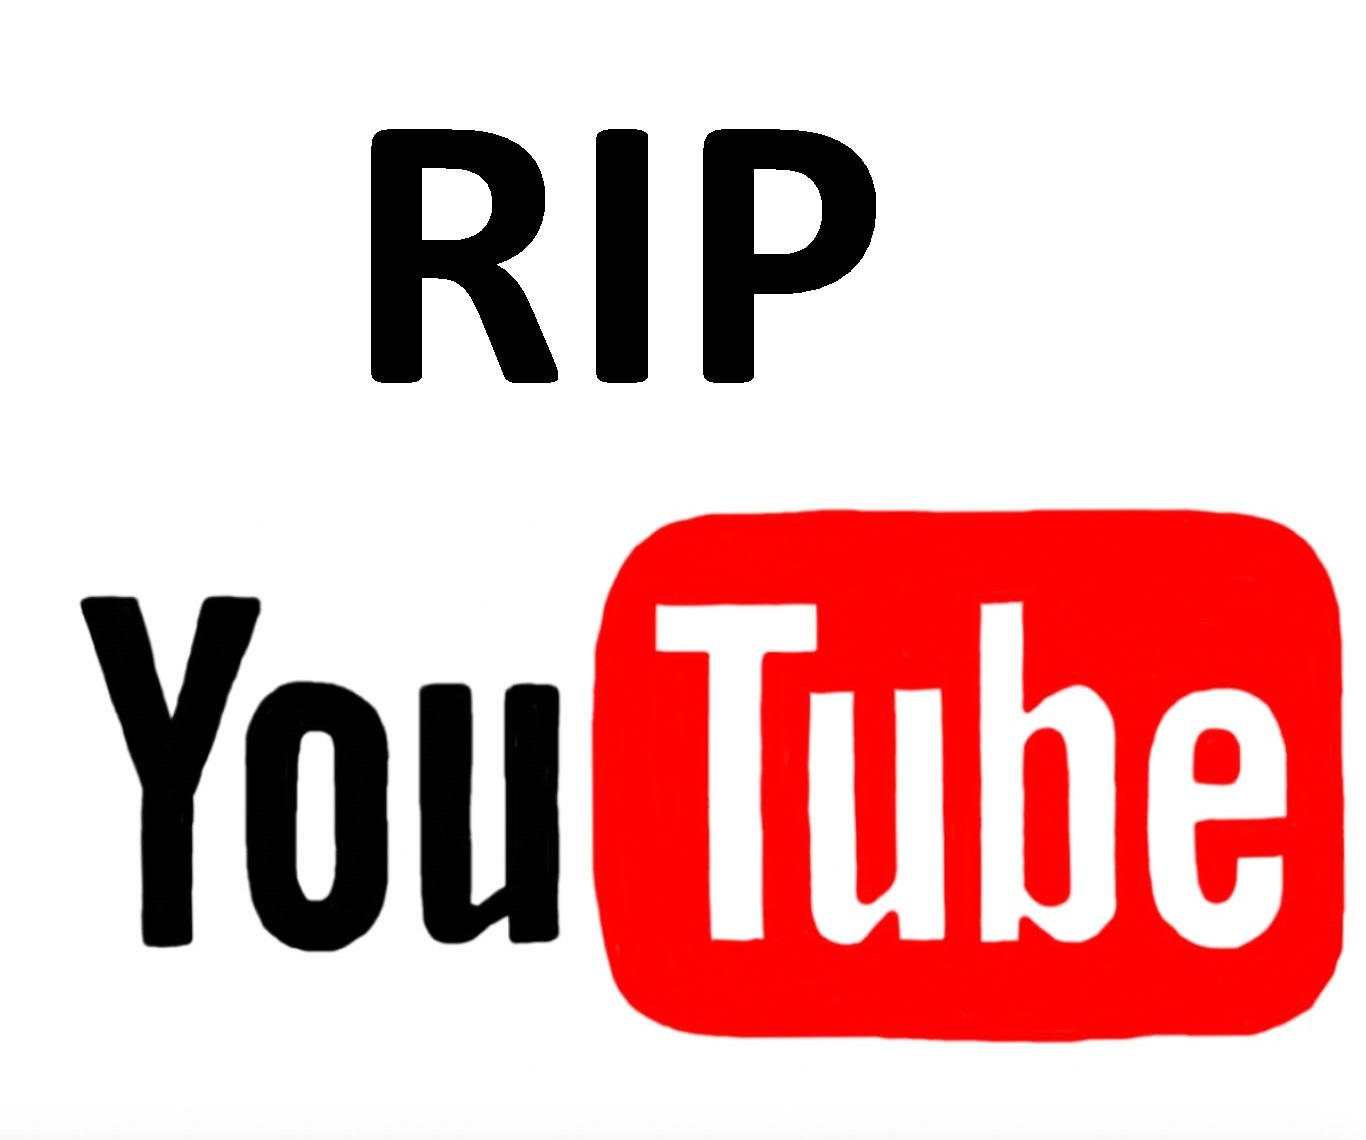 Old YouTube Logo - Only '90s kids will remember the old YouTube logo : funny